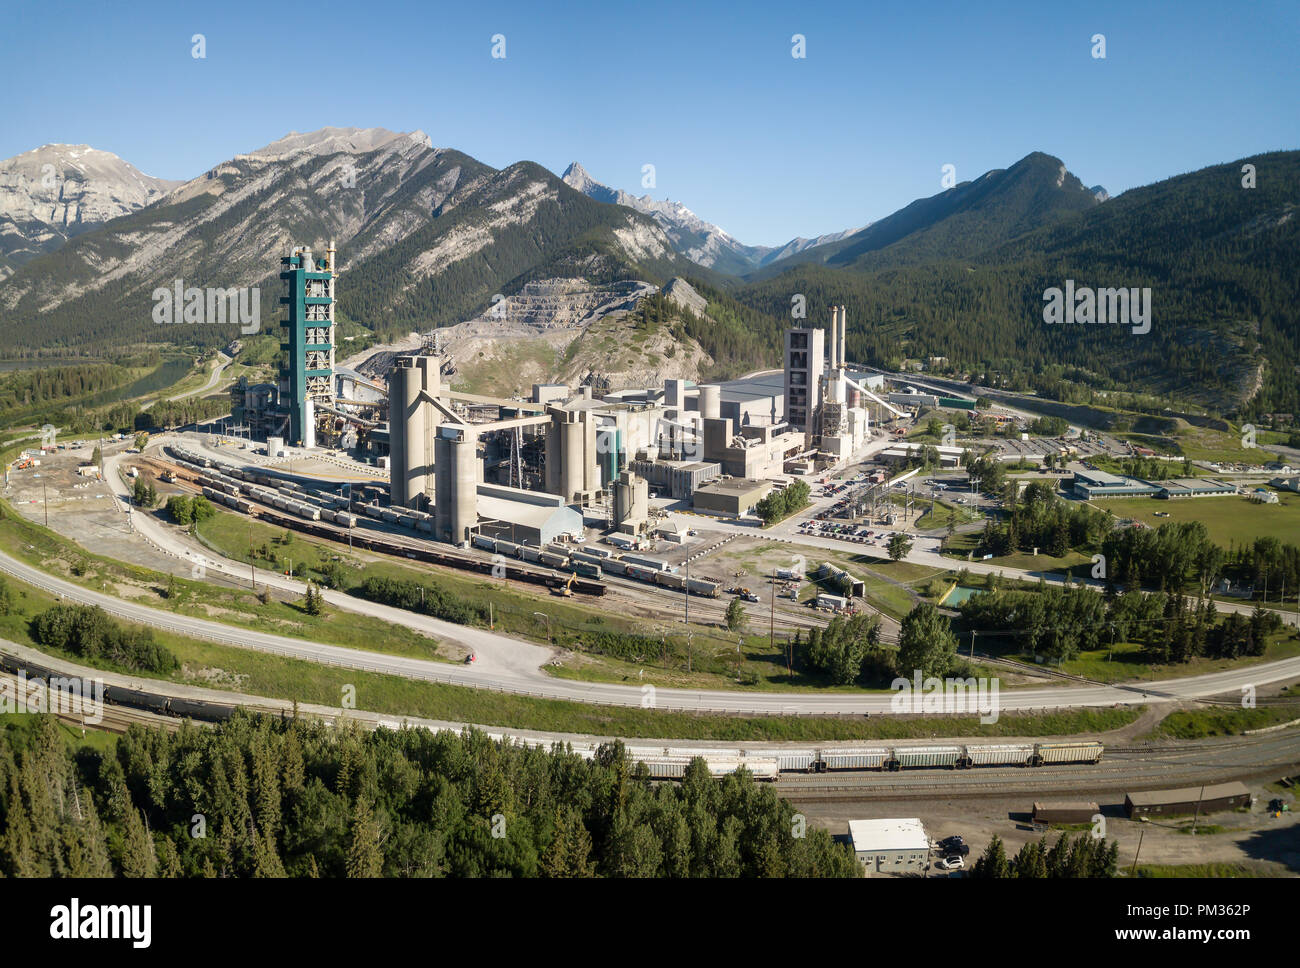 Aerial view of an industrial site in the Canadian Rockies during a vibrant sunny summer day. Taken near Calgary, Alberta, Canada. Stock Photo